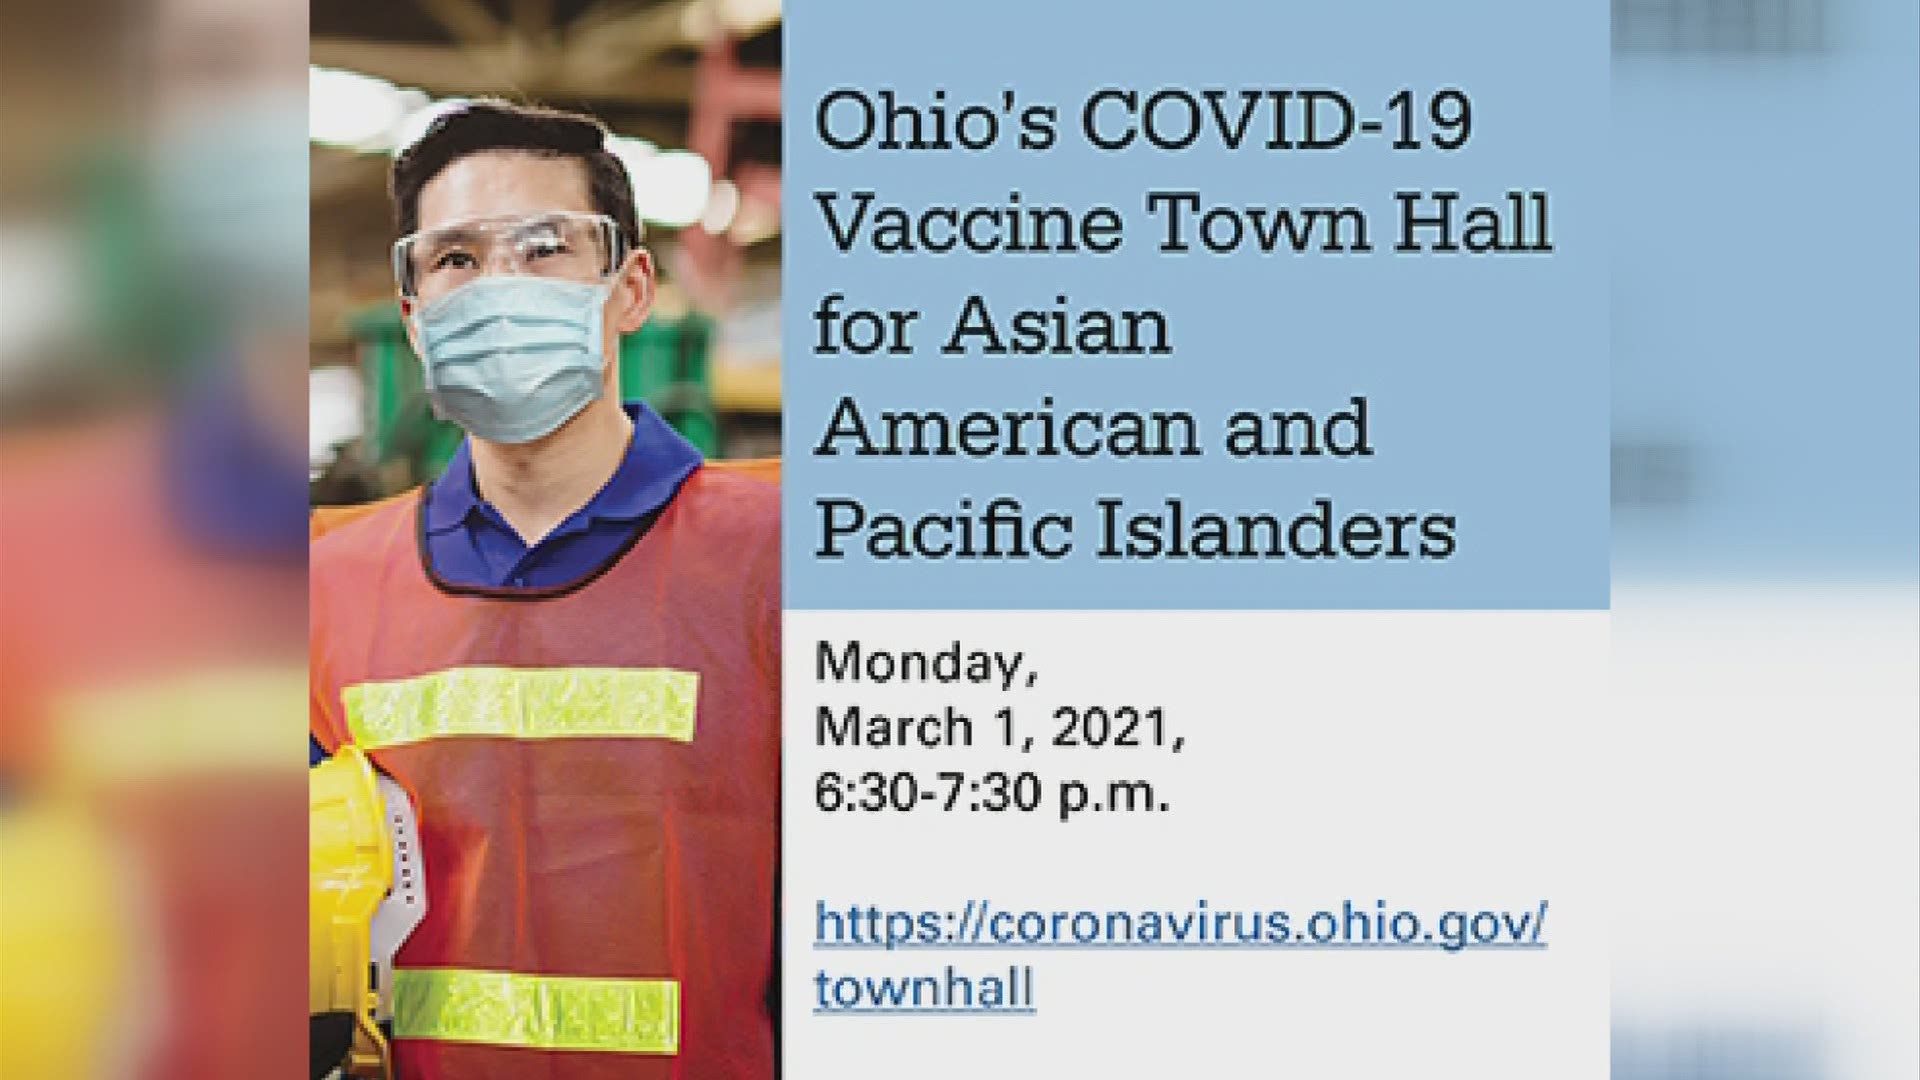 Town Hall's are taking place to address disparity in the Covid-19 vaccine.